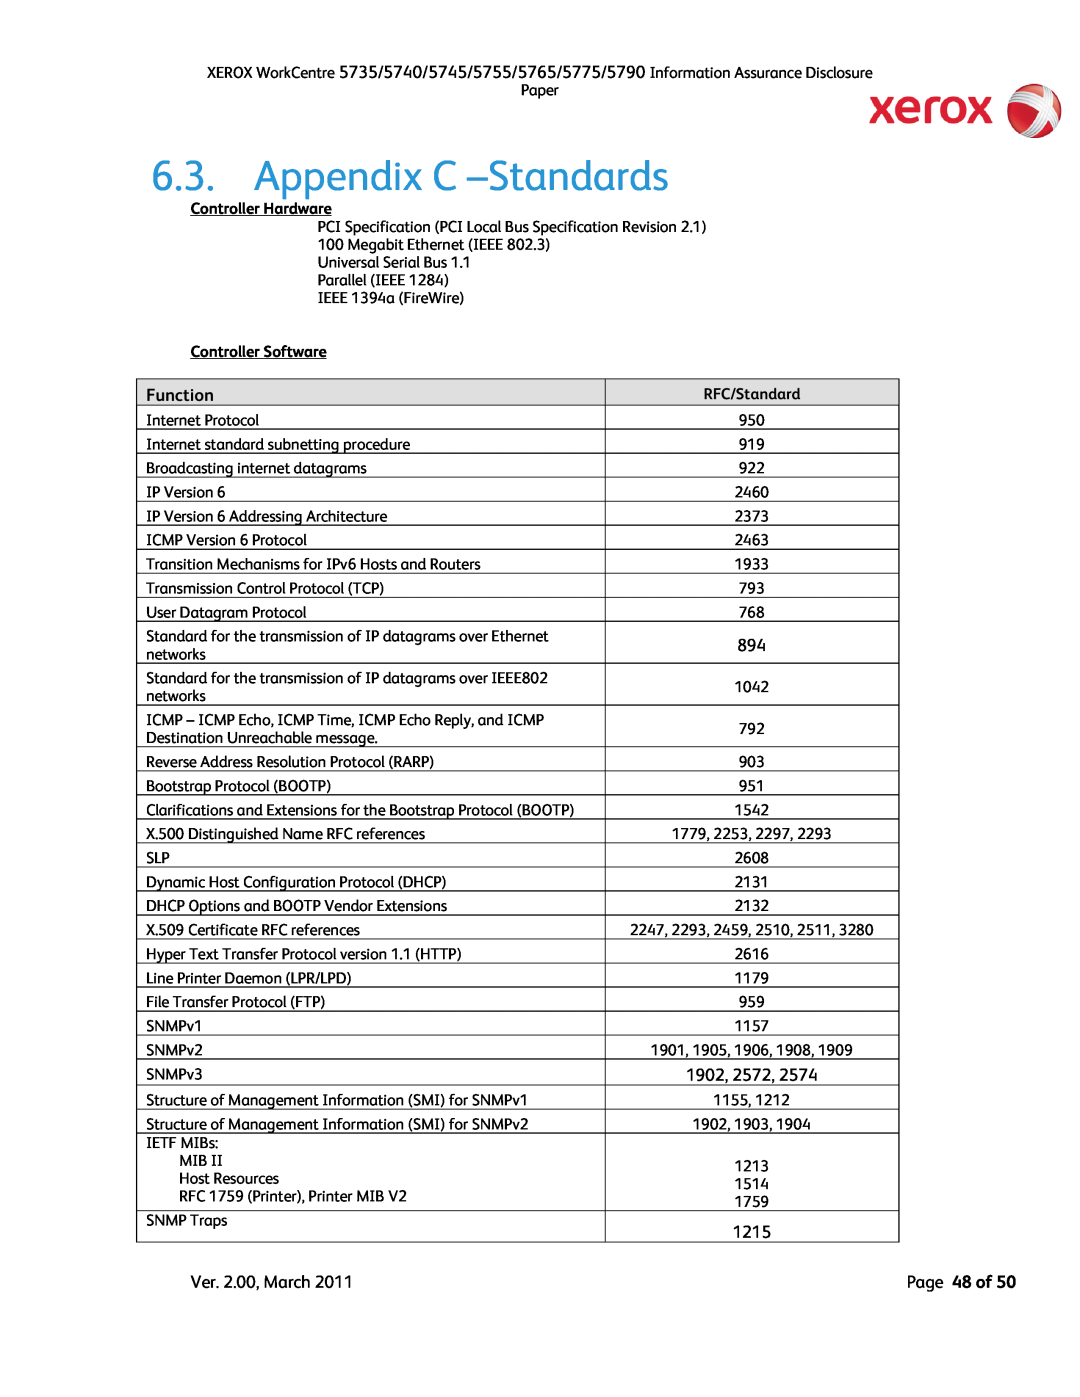 Xerox 5790, 5775, 5745 Appendix C –Standards, Function, Page 48 of, Controller Hardware, Controller Software, RFC/Standard 